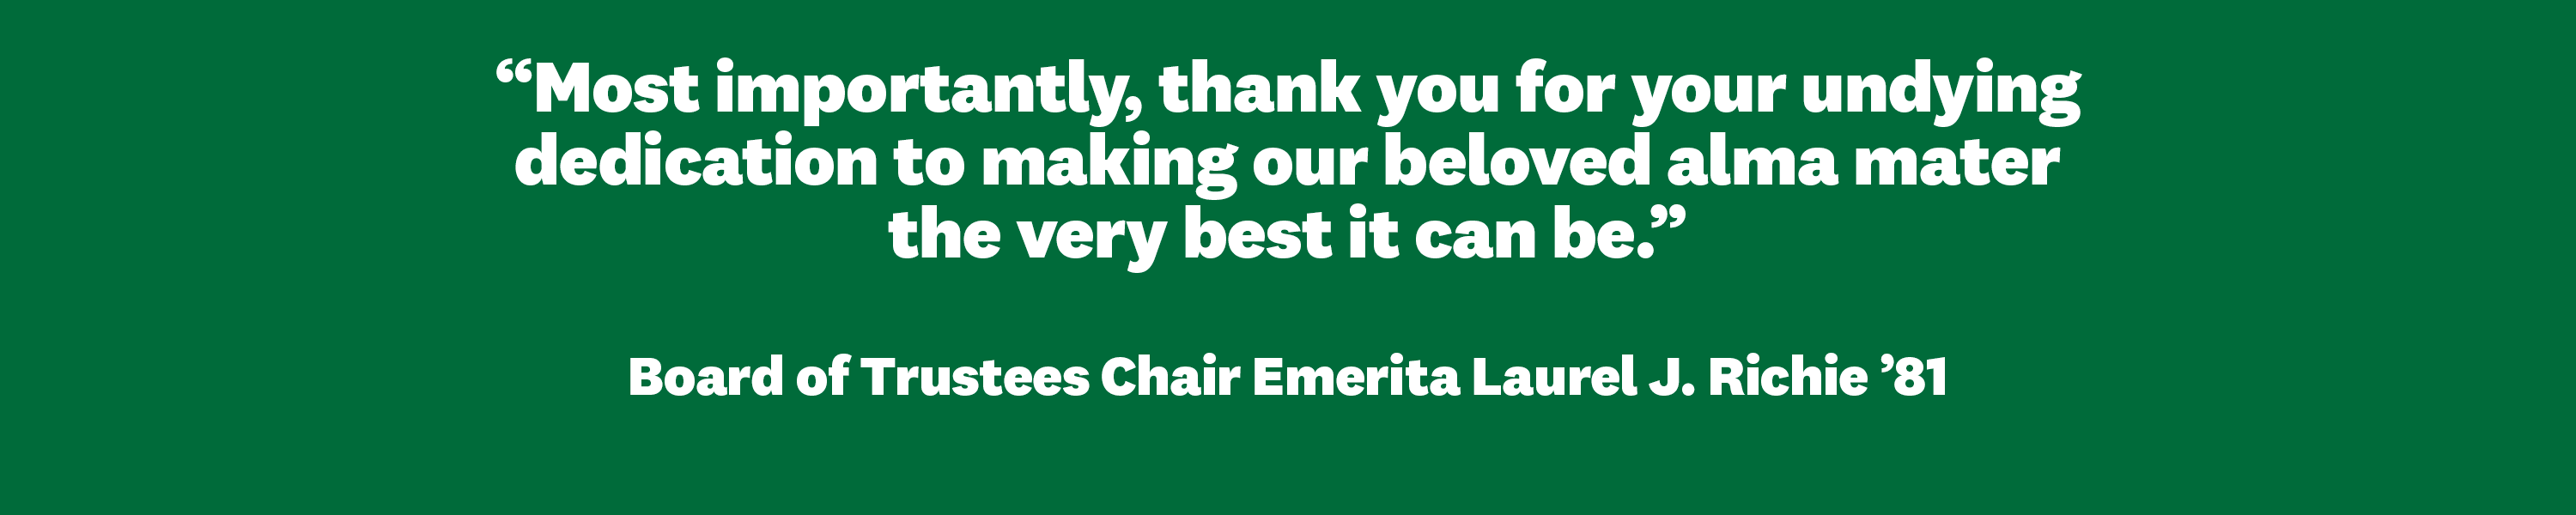 “Most importantly, thank you for your undying dedication to making our beloved alma mater the very best it can be.” Laurel J. Richie ’81